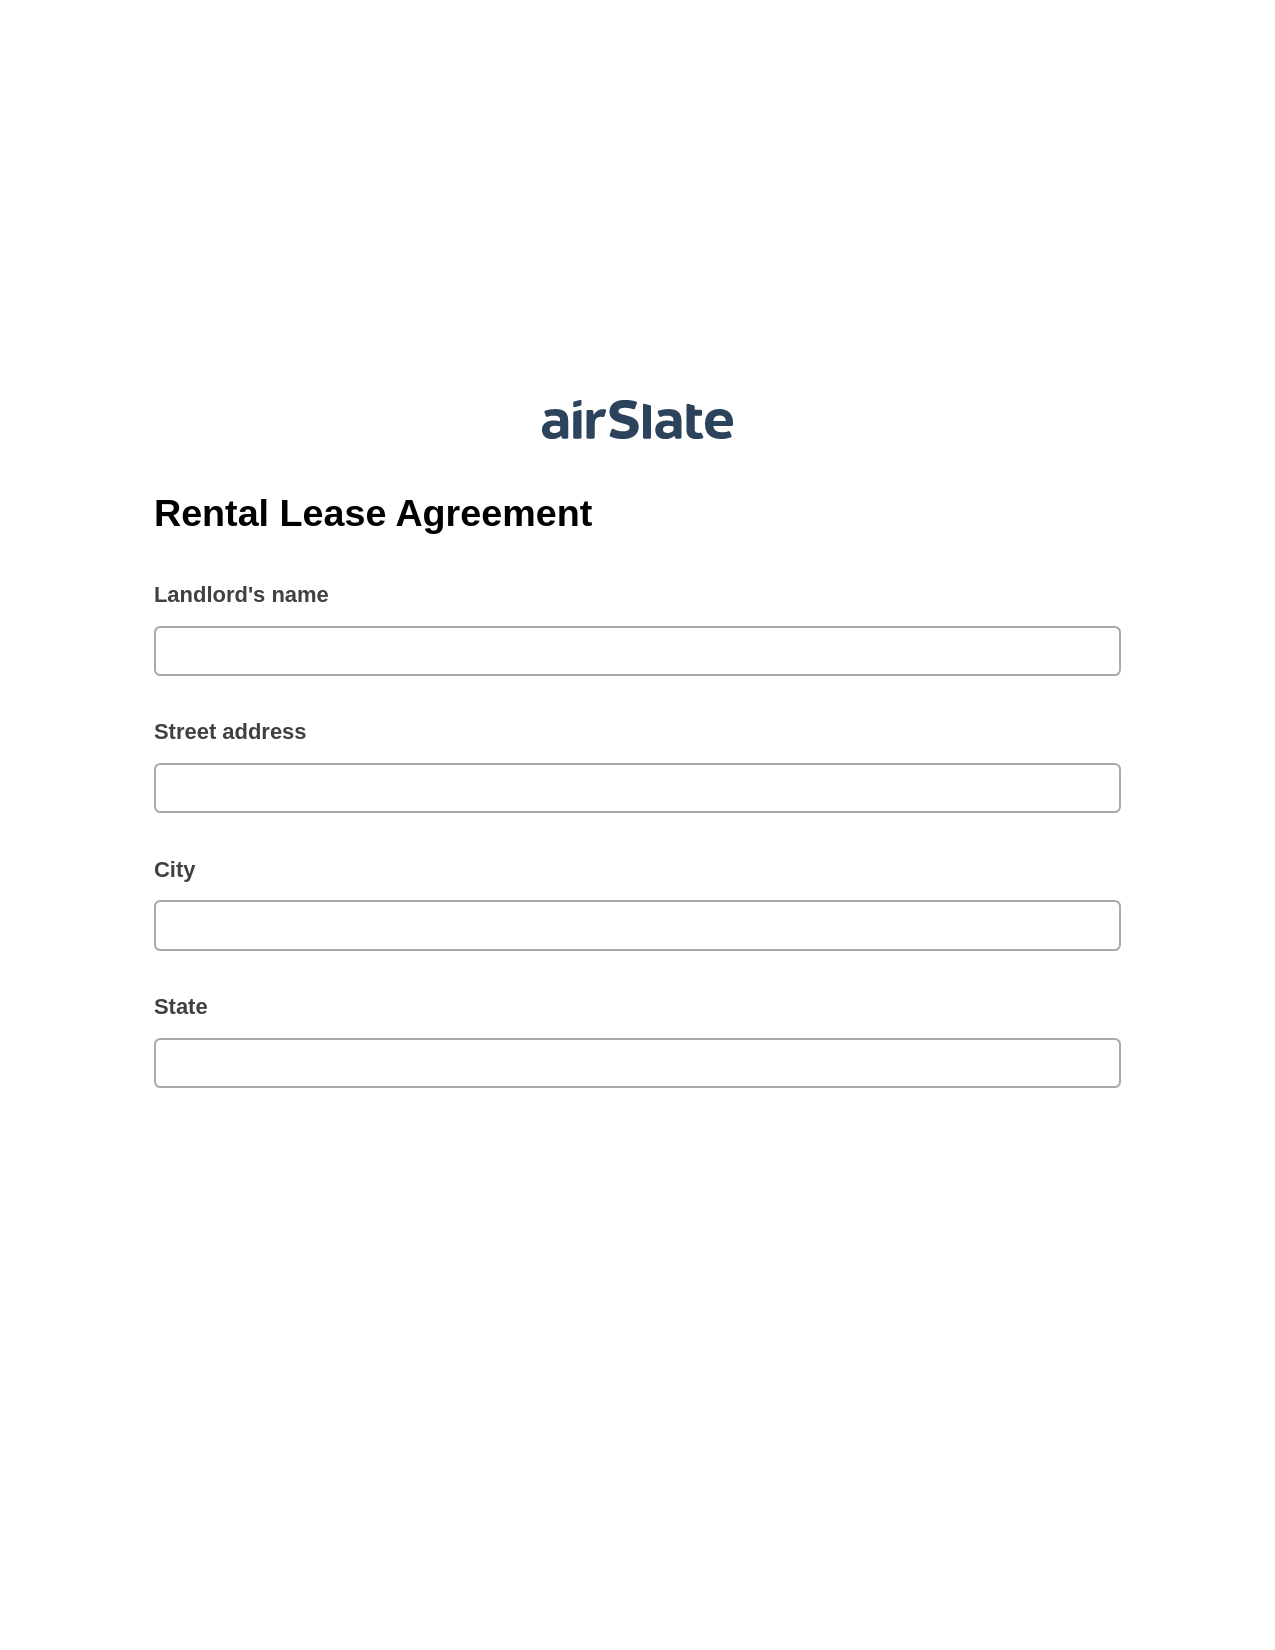 Rental Lease Agreement Pre-fill Dropdown from Airtable, Create QuickBooks invoice Bot, Export to Formstack Documents Bot